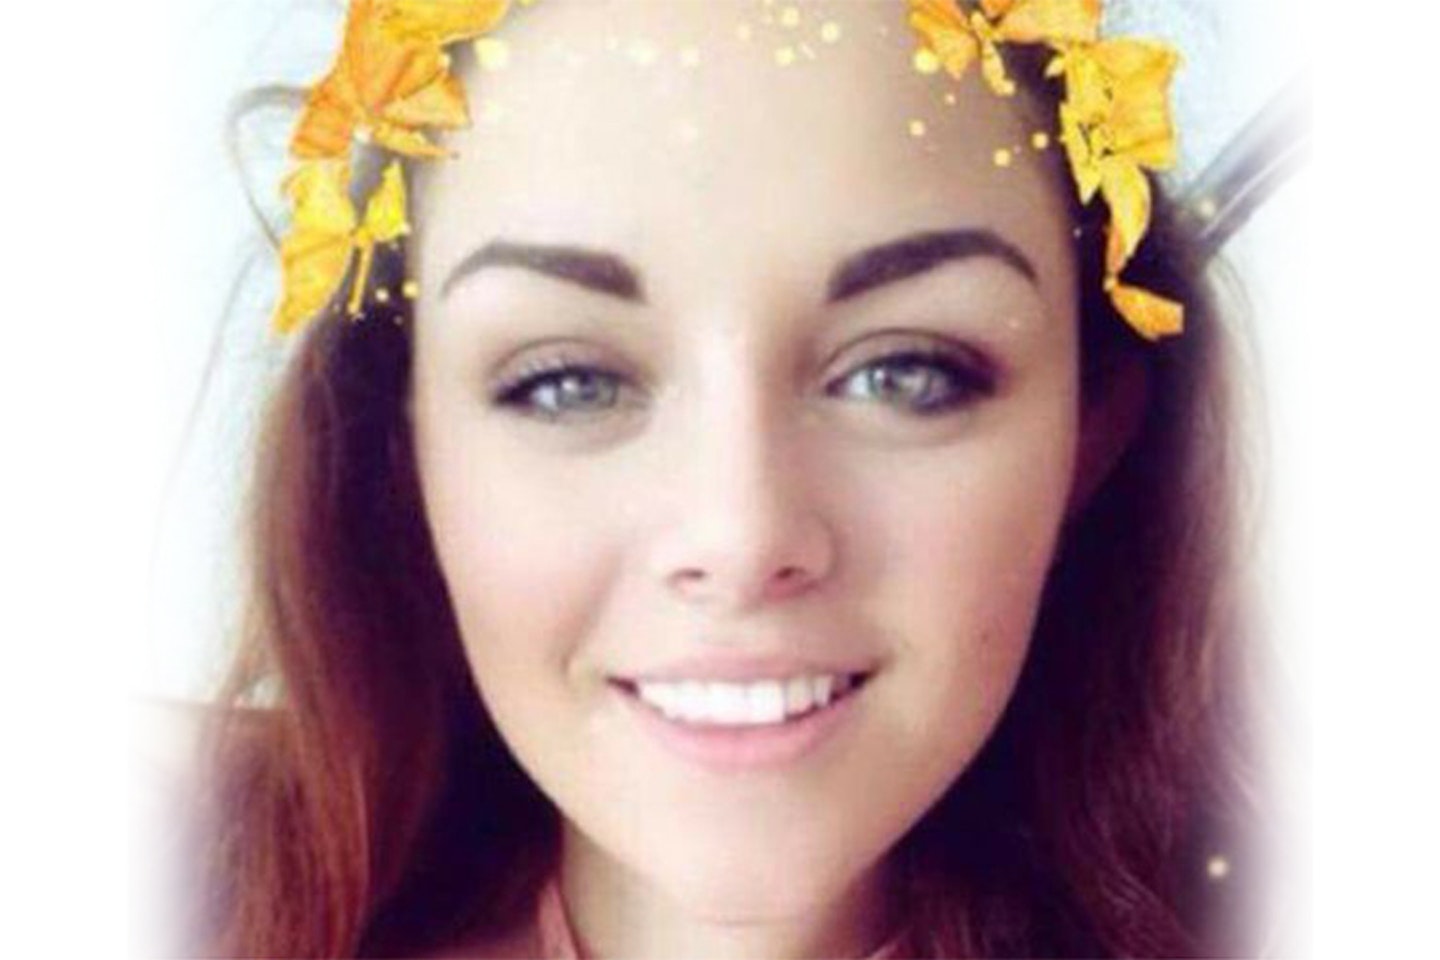 olivia-campbell-funeral-manchester-attack-victim-today